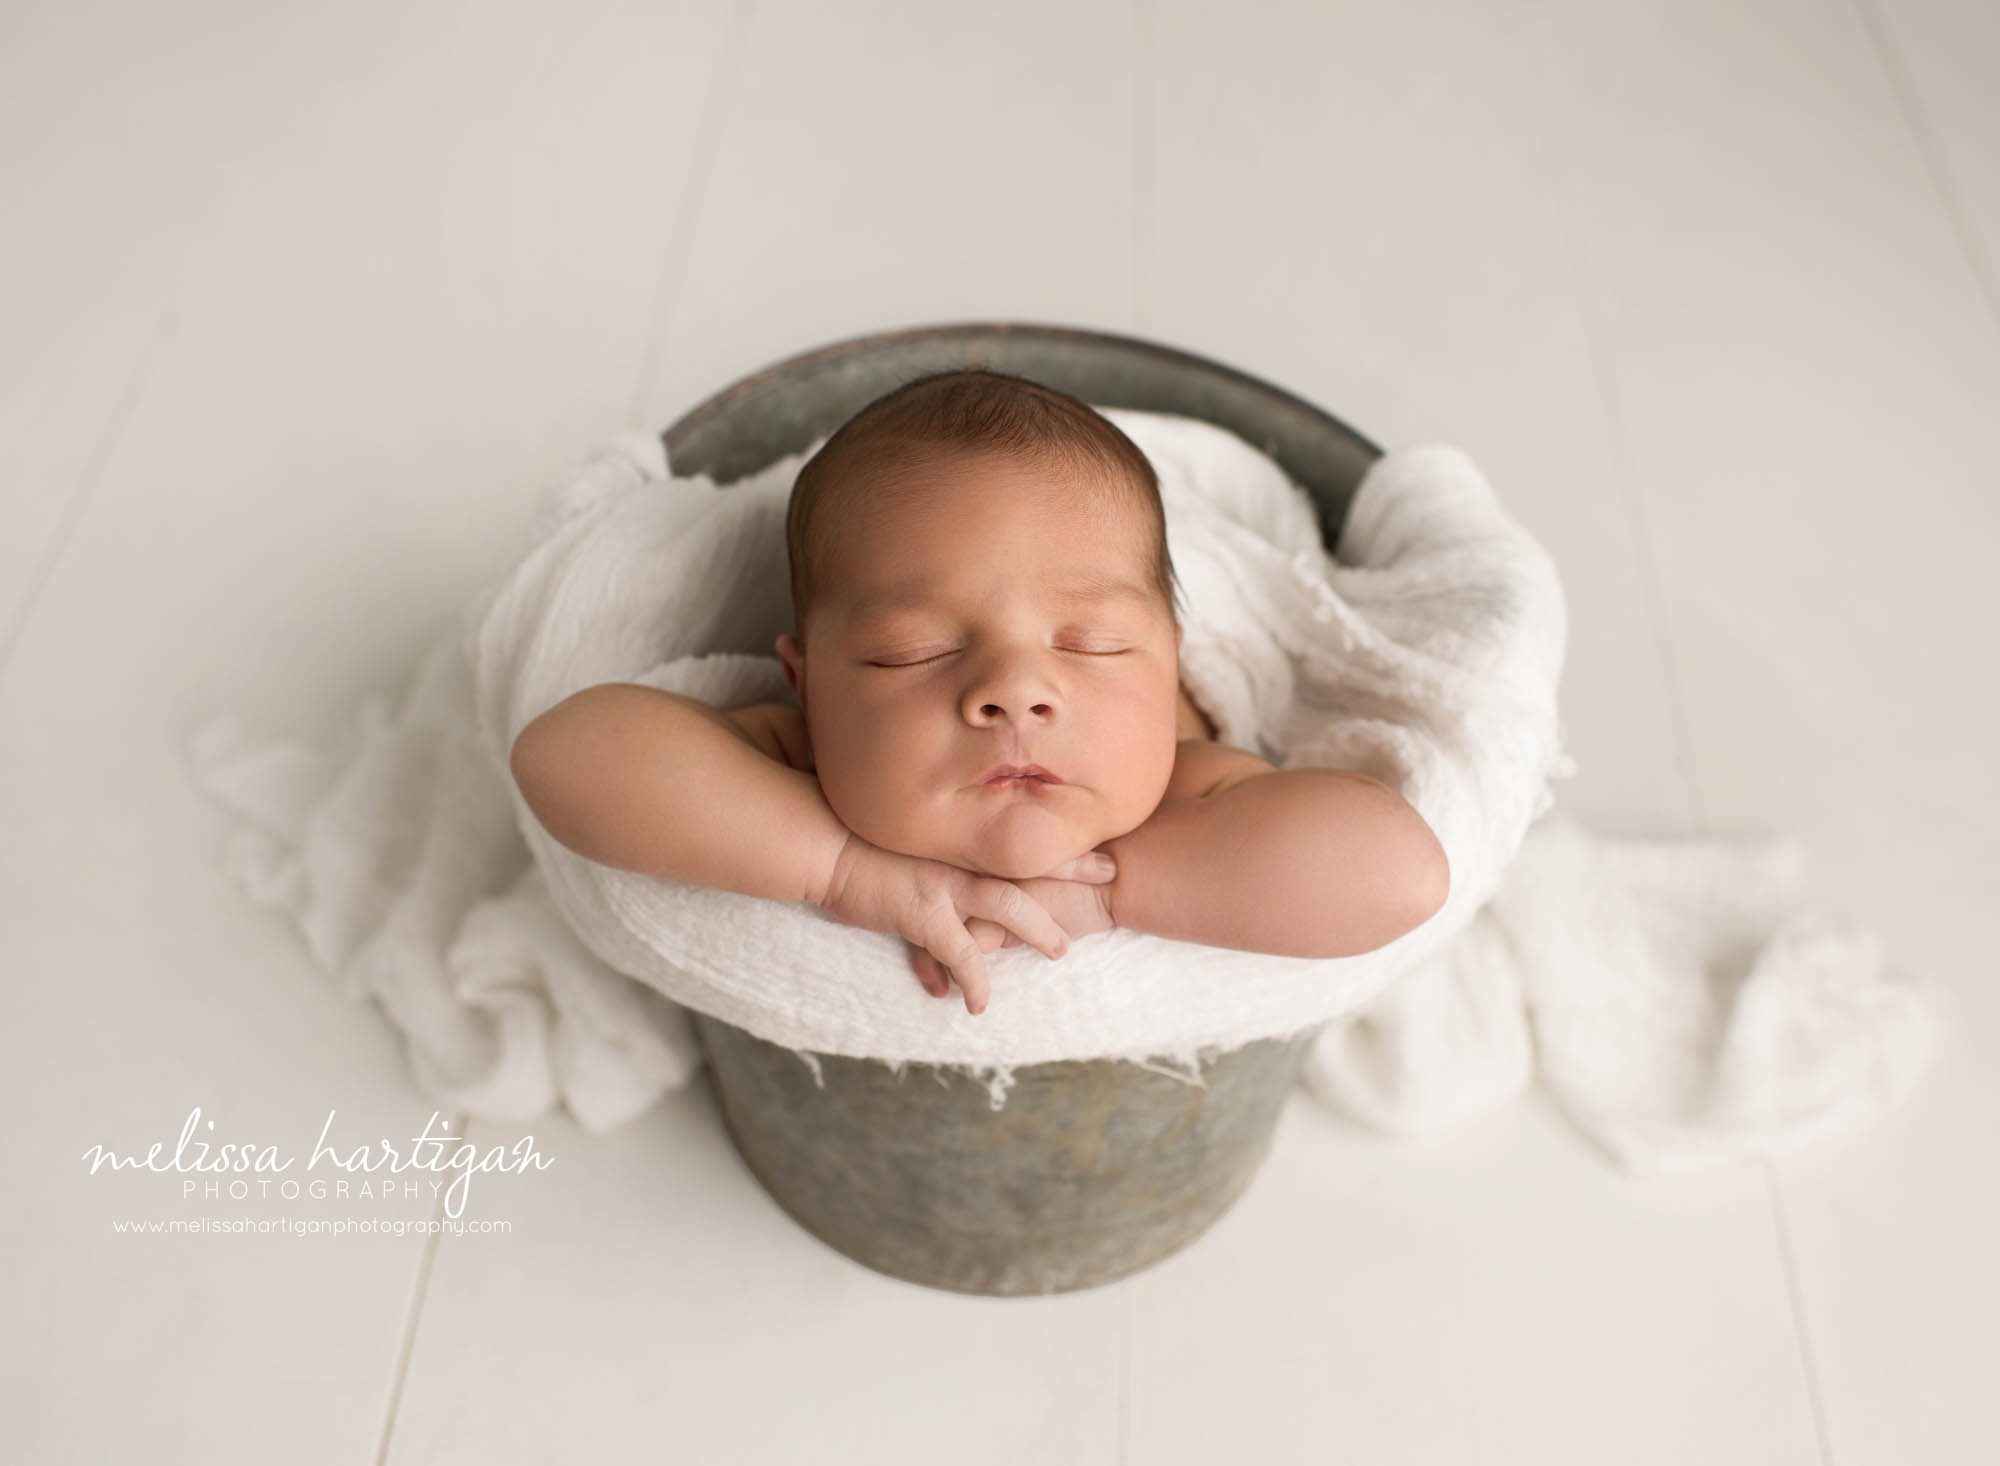 newbonr baby boy posed in metal bucket with white layer